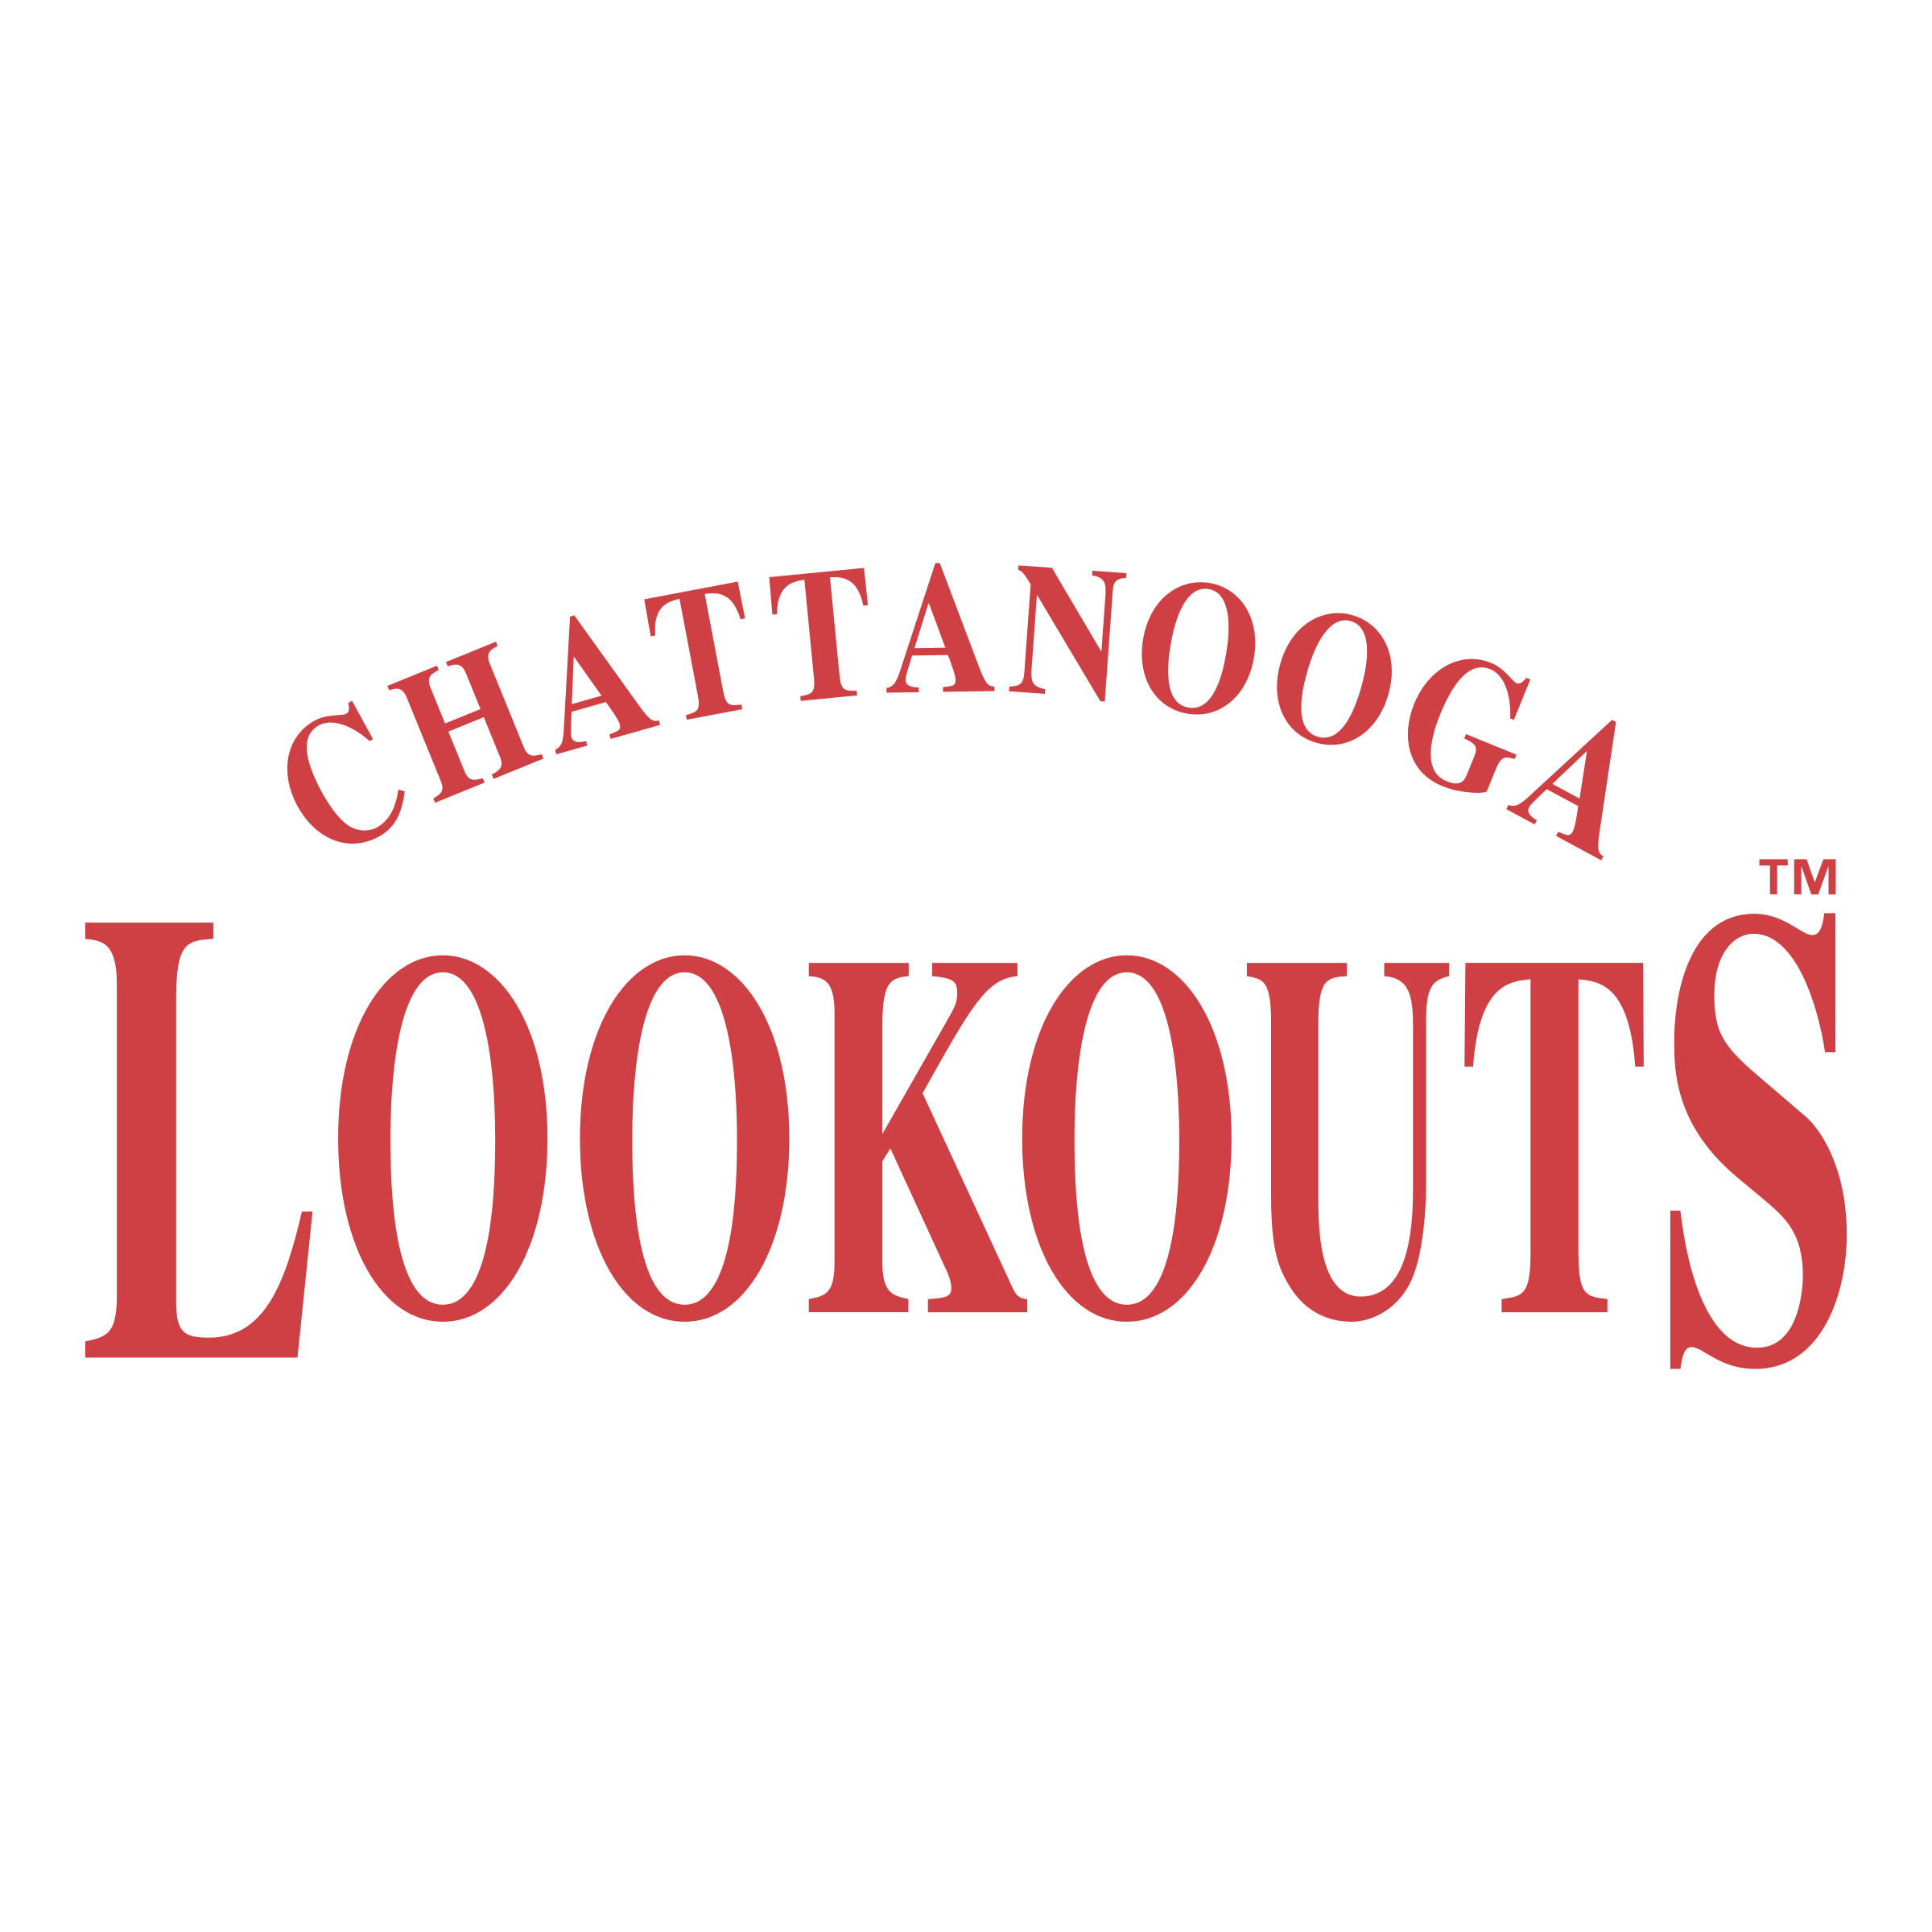 Chattanooga Lookouts PNG HD Quality